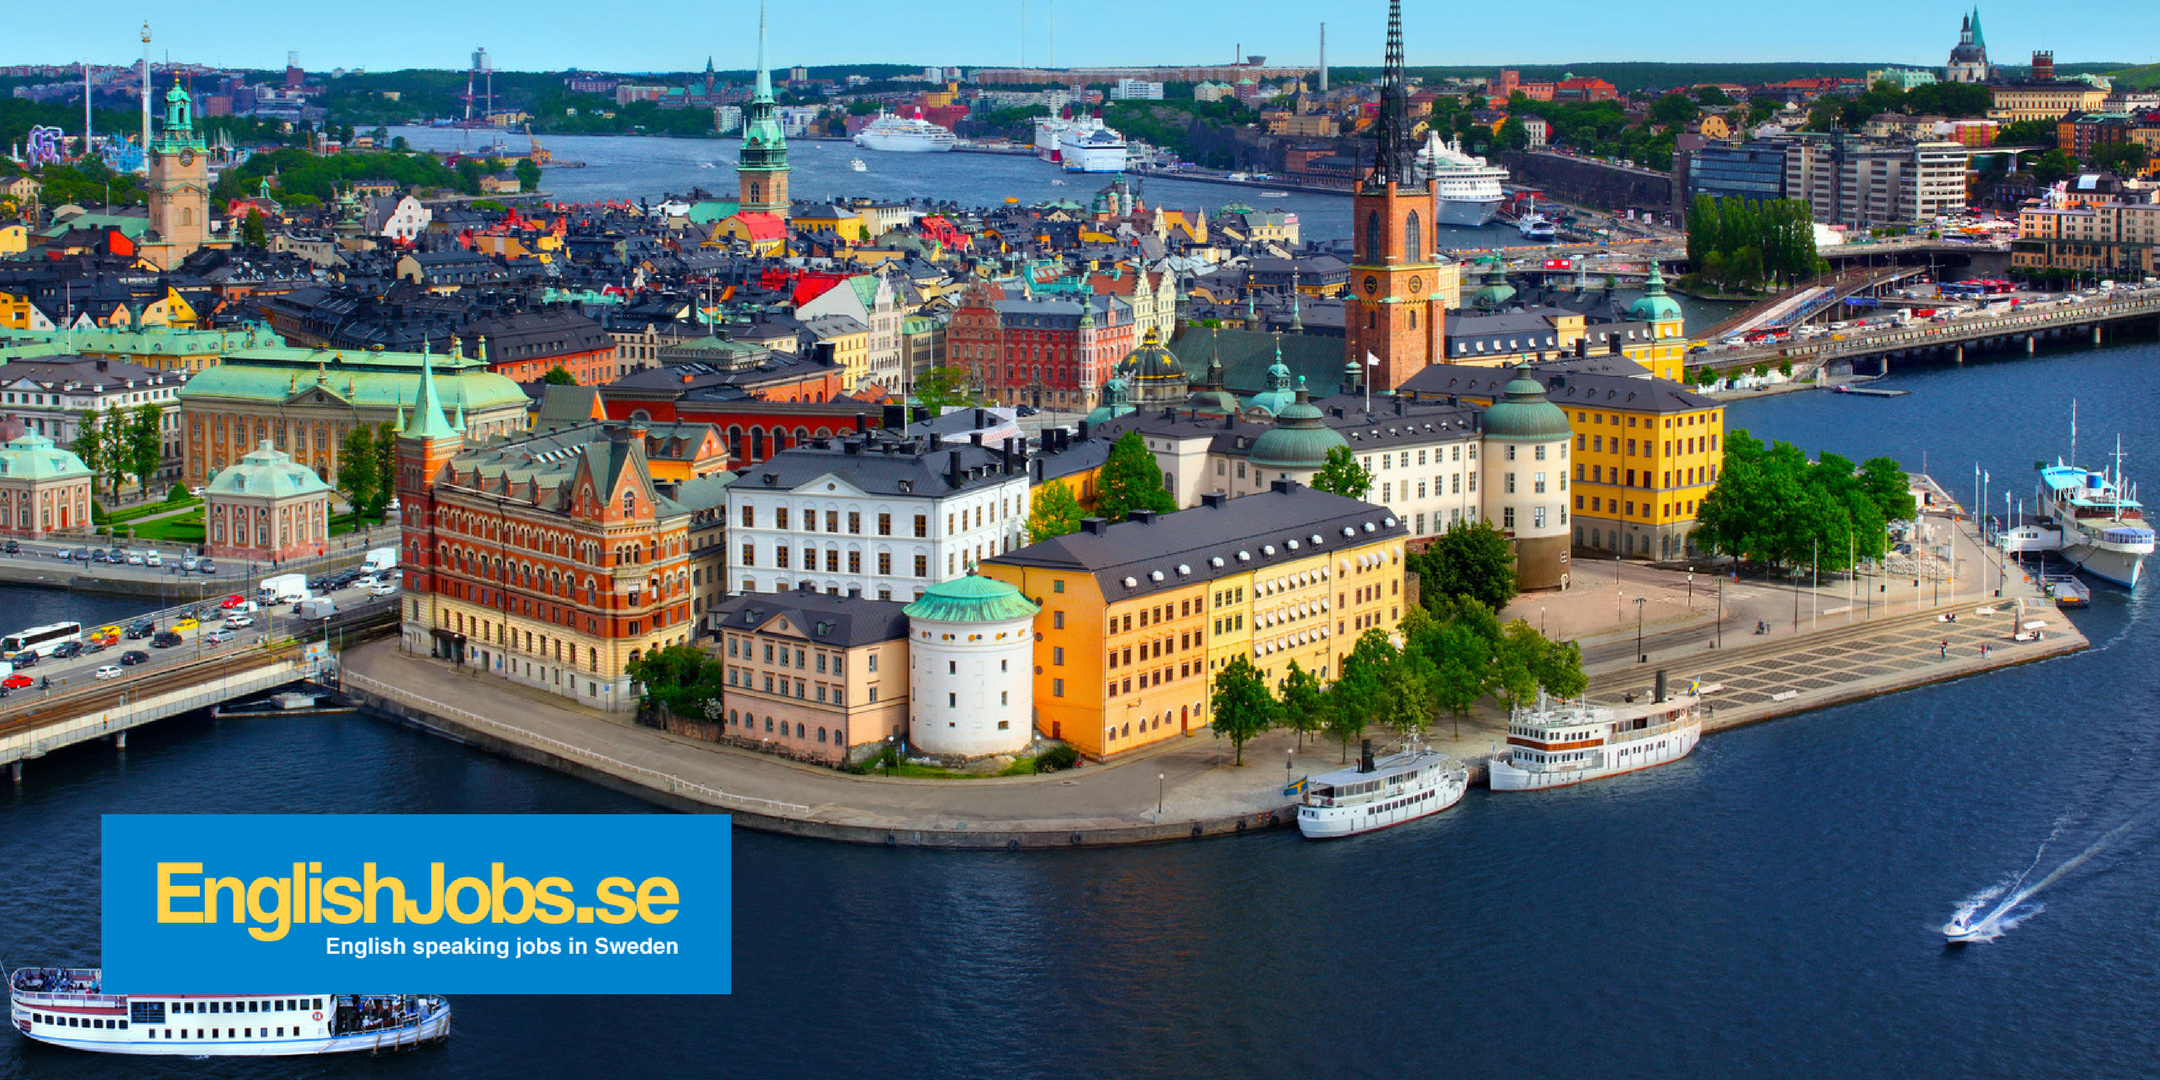 Work in Europe (Sweden, Denmark, Norway Germany) - Your CV, job search and work visa - your move from Adelaide to Stockholm